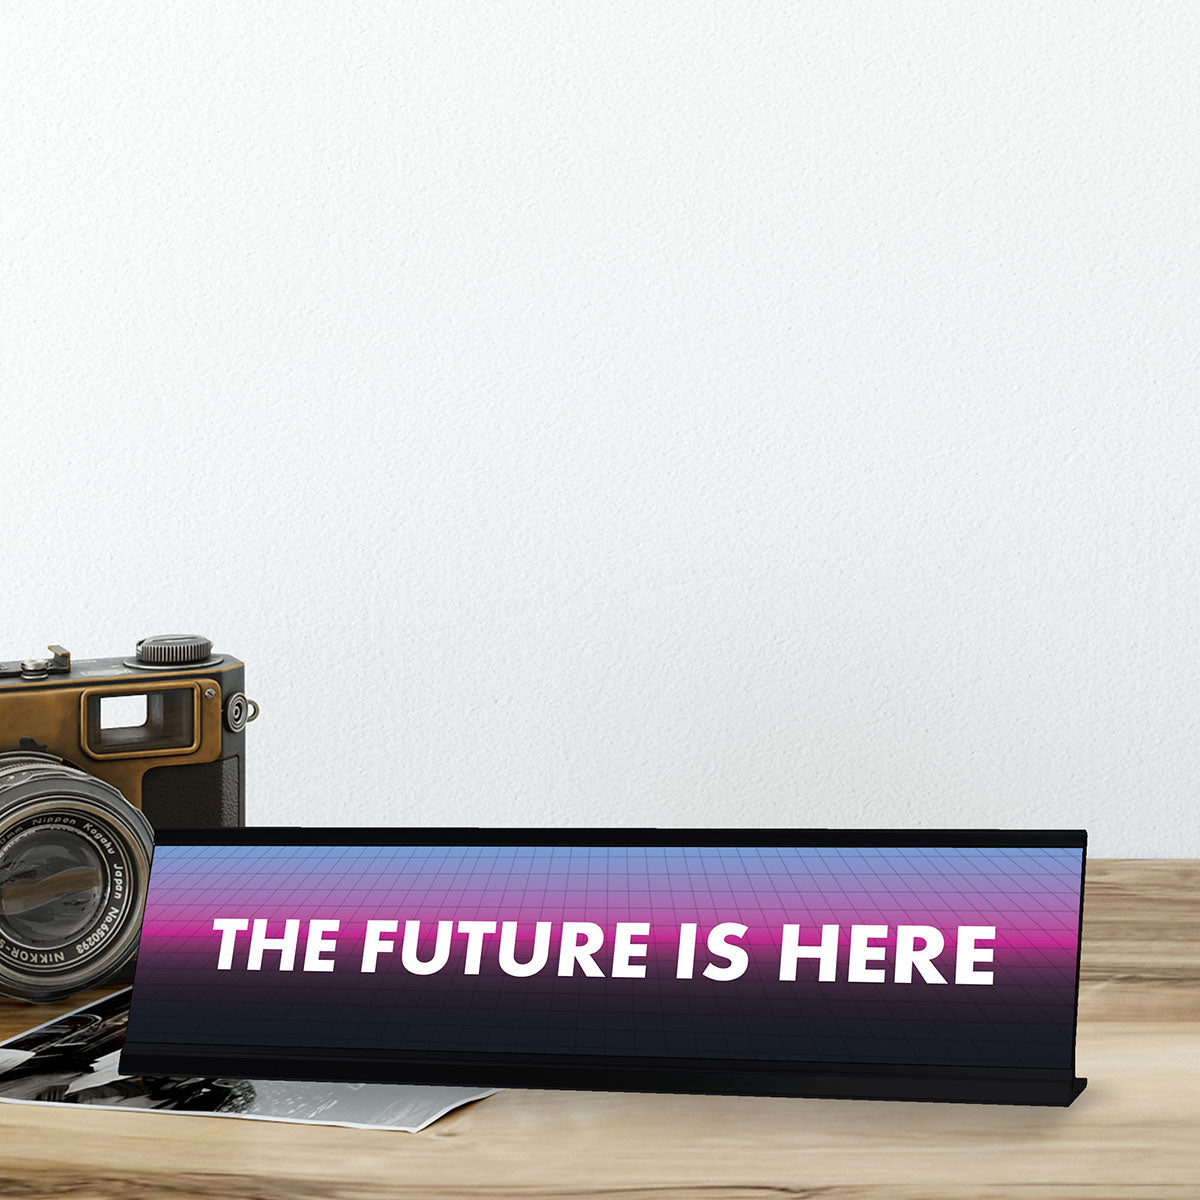 The Future is Here, Designer Series Desk Sign, Novelty Nameplate (2 x 8")